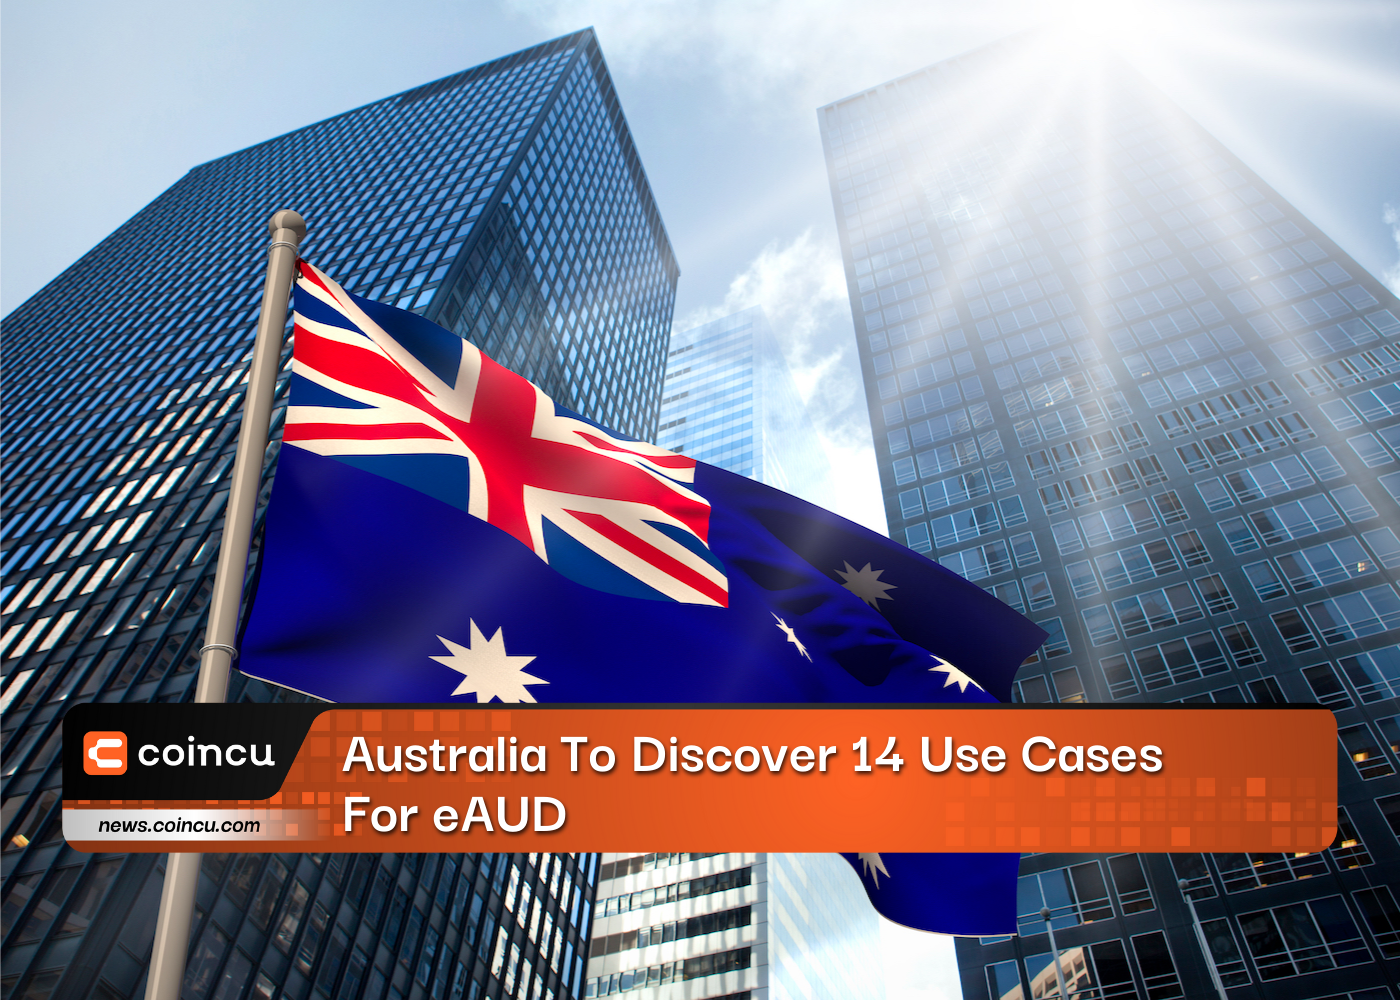 Australia To Discover 14 Use Cases For eAUD